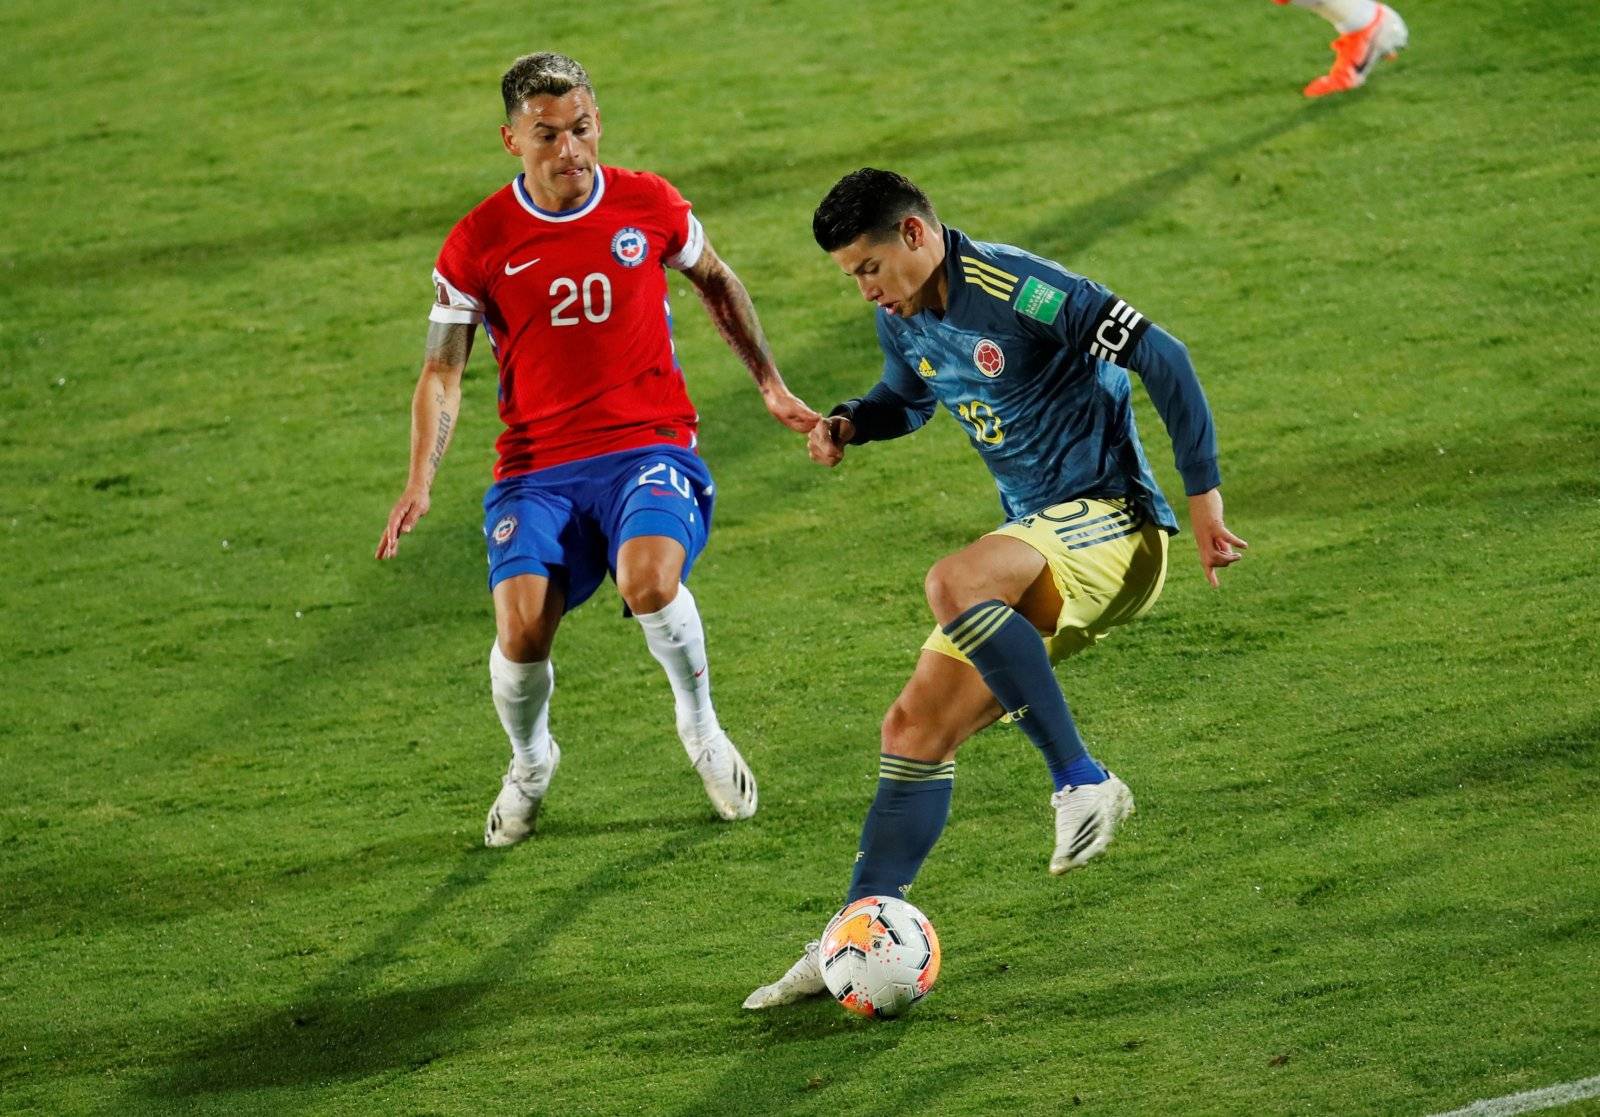 Everton: James Rodriguez disappoints for Colombia ahead of Merseyside derby - Everton